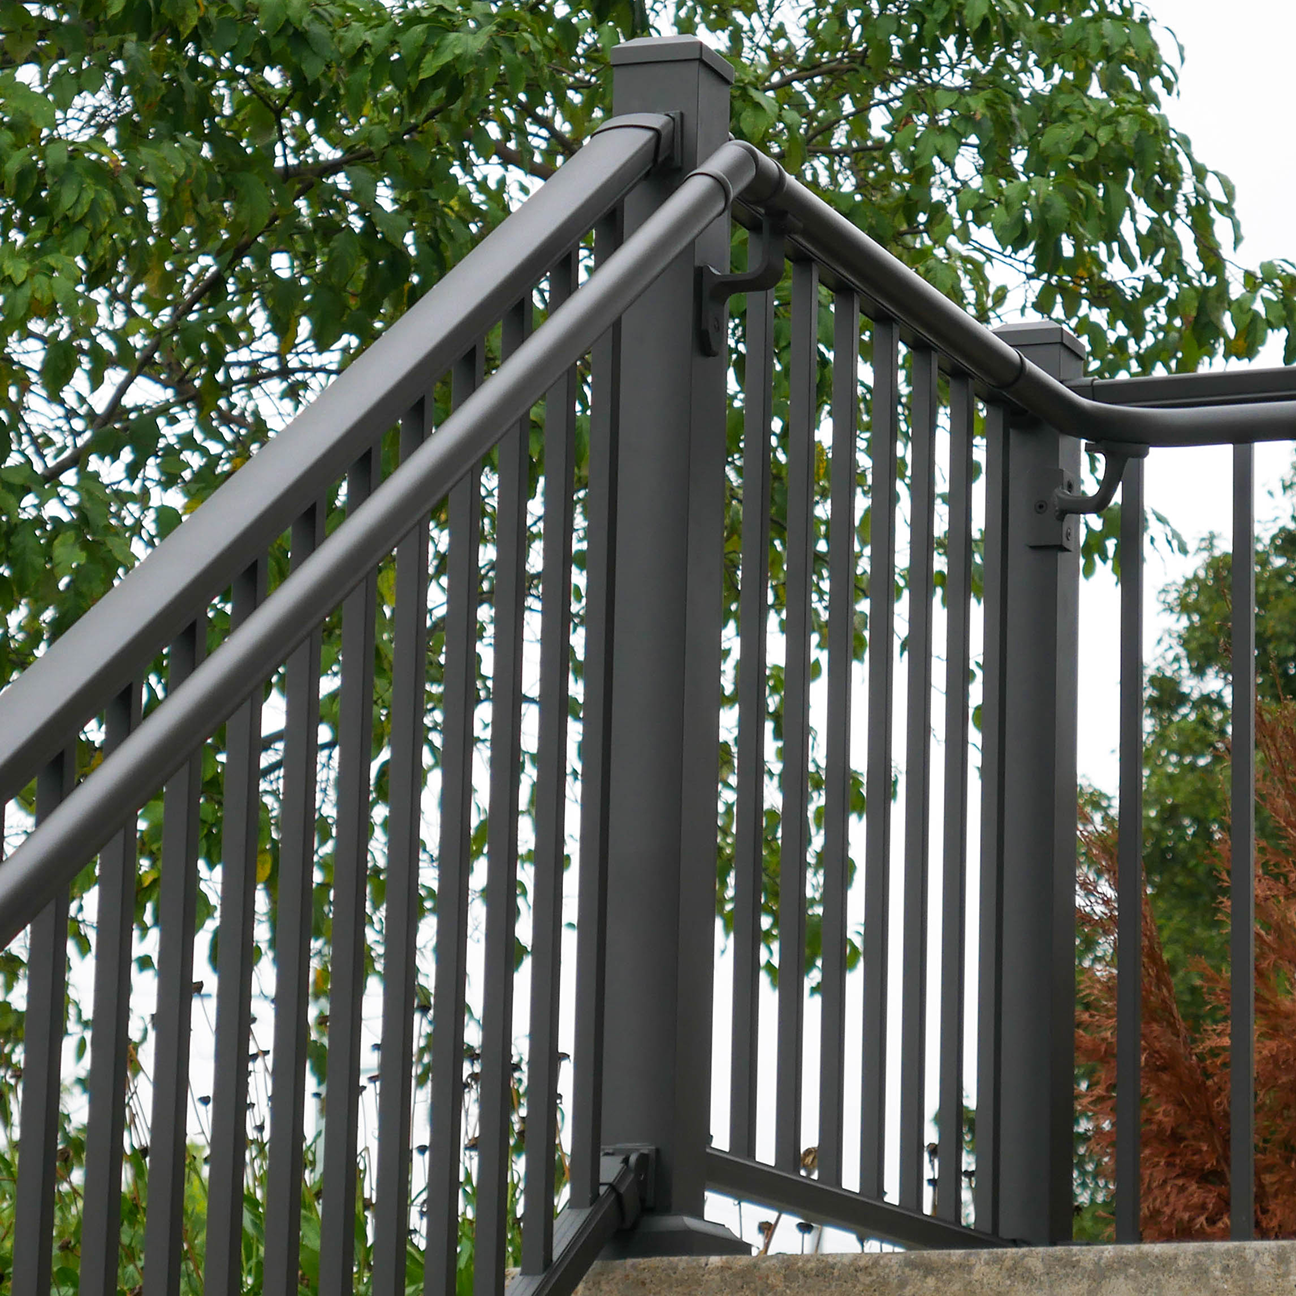 Dekpro Prestige Cocoa Bronze Stair Post attached to secondary handrail.